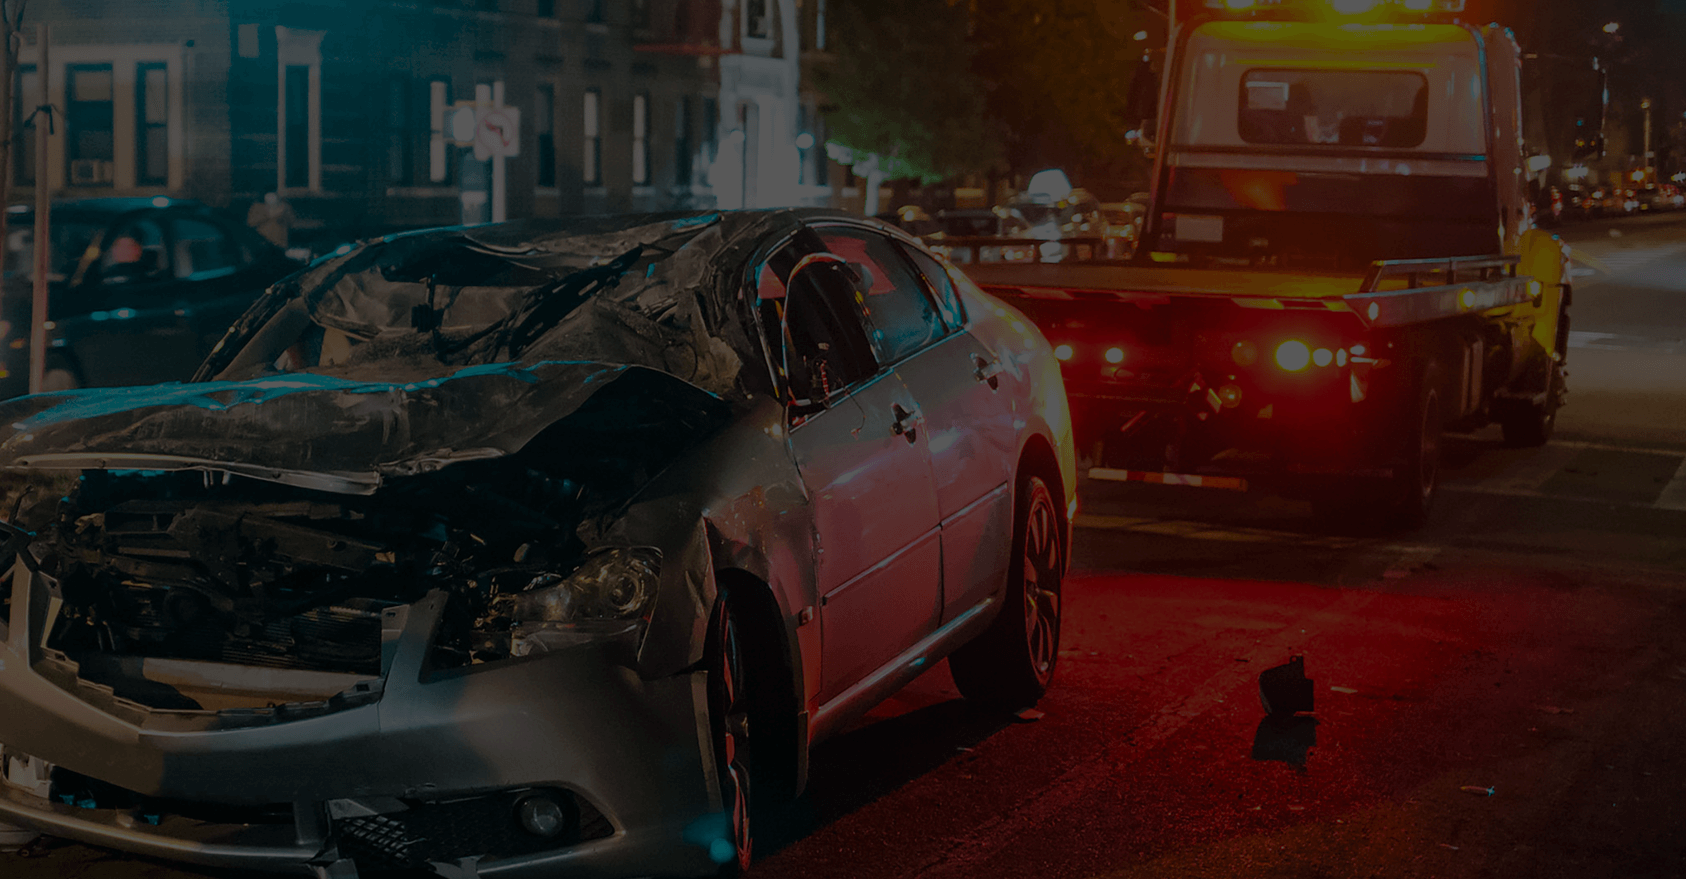 background image of car accident